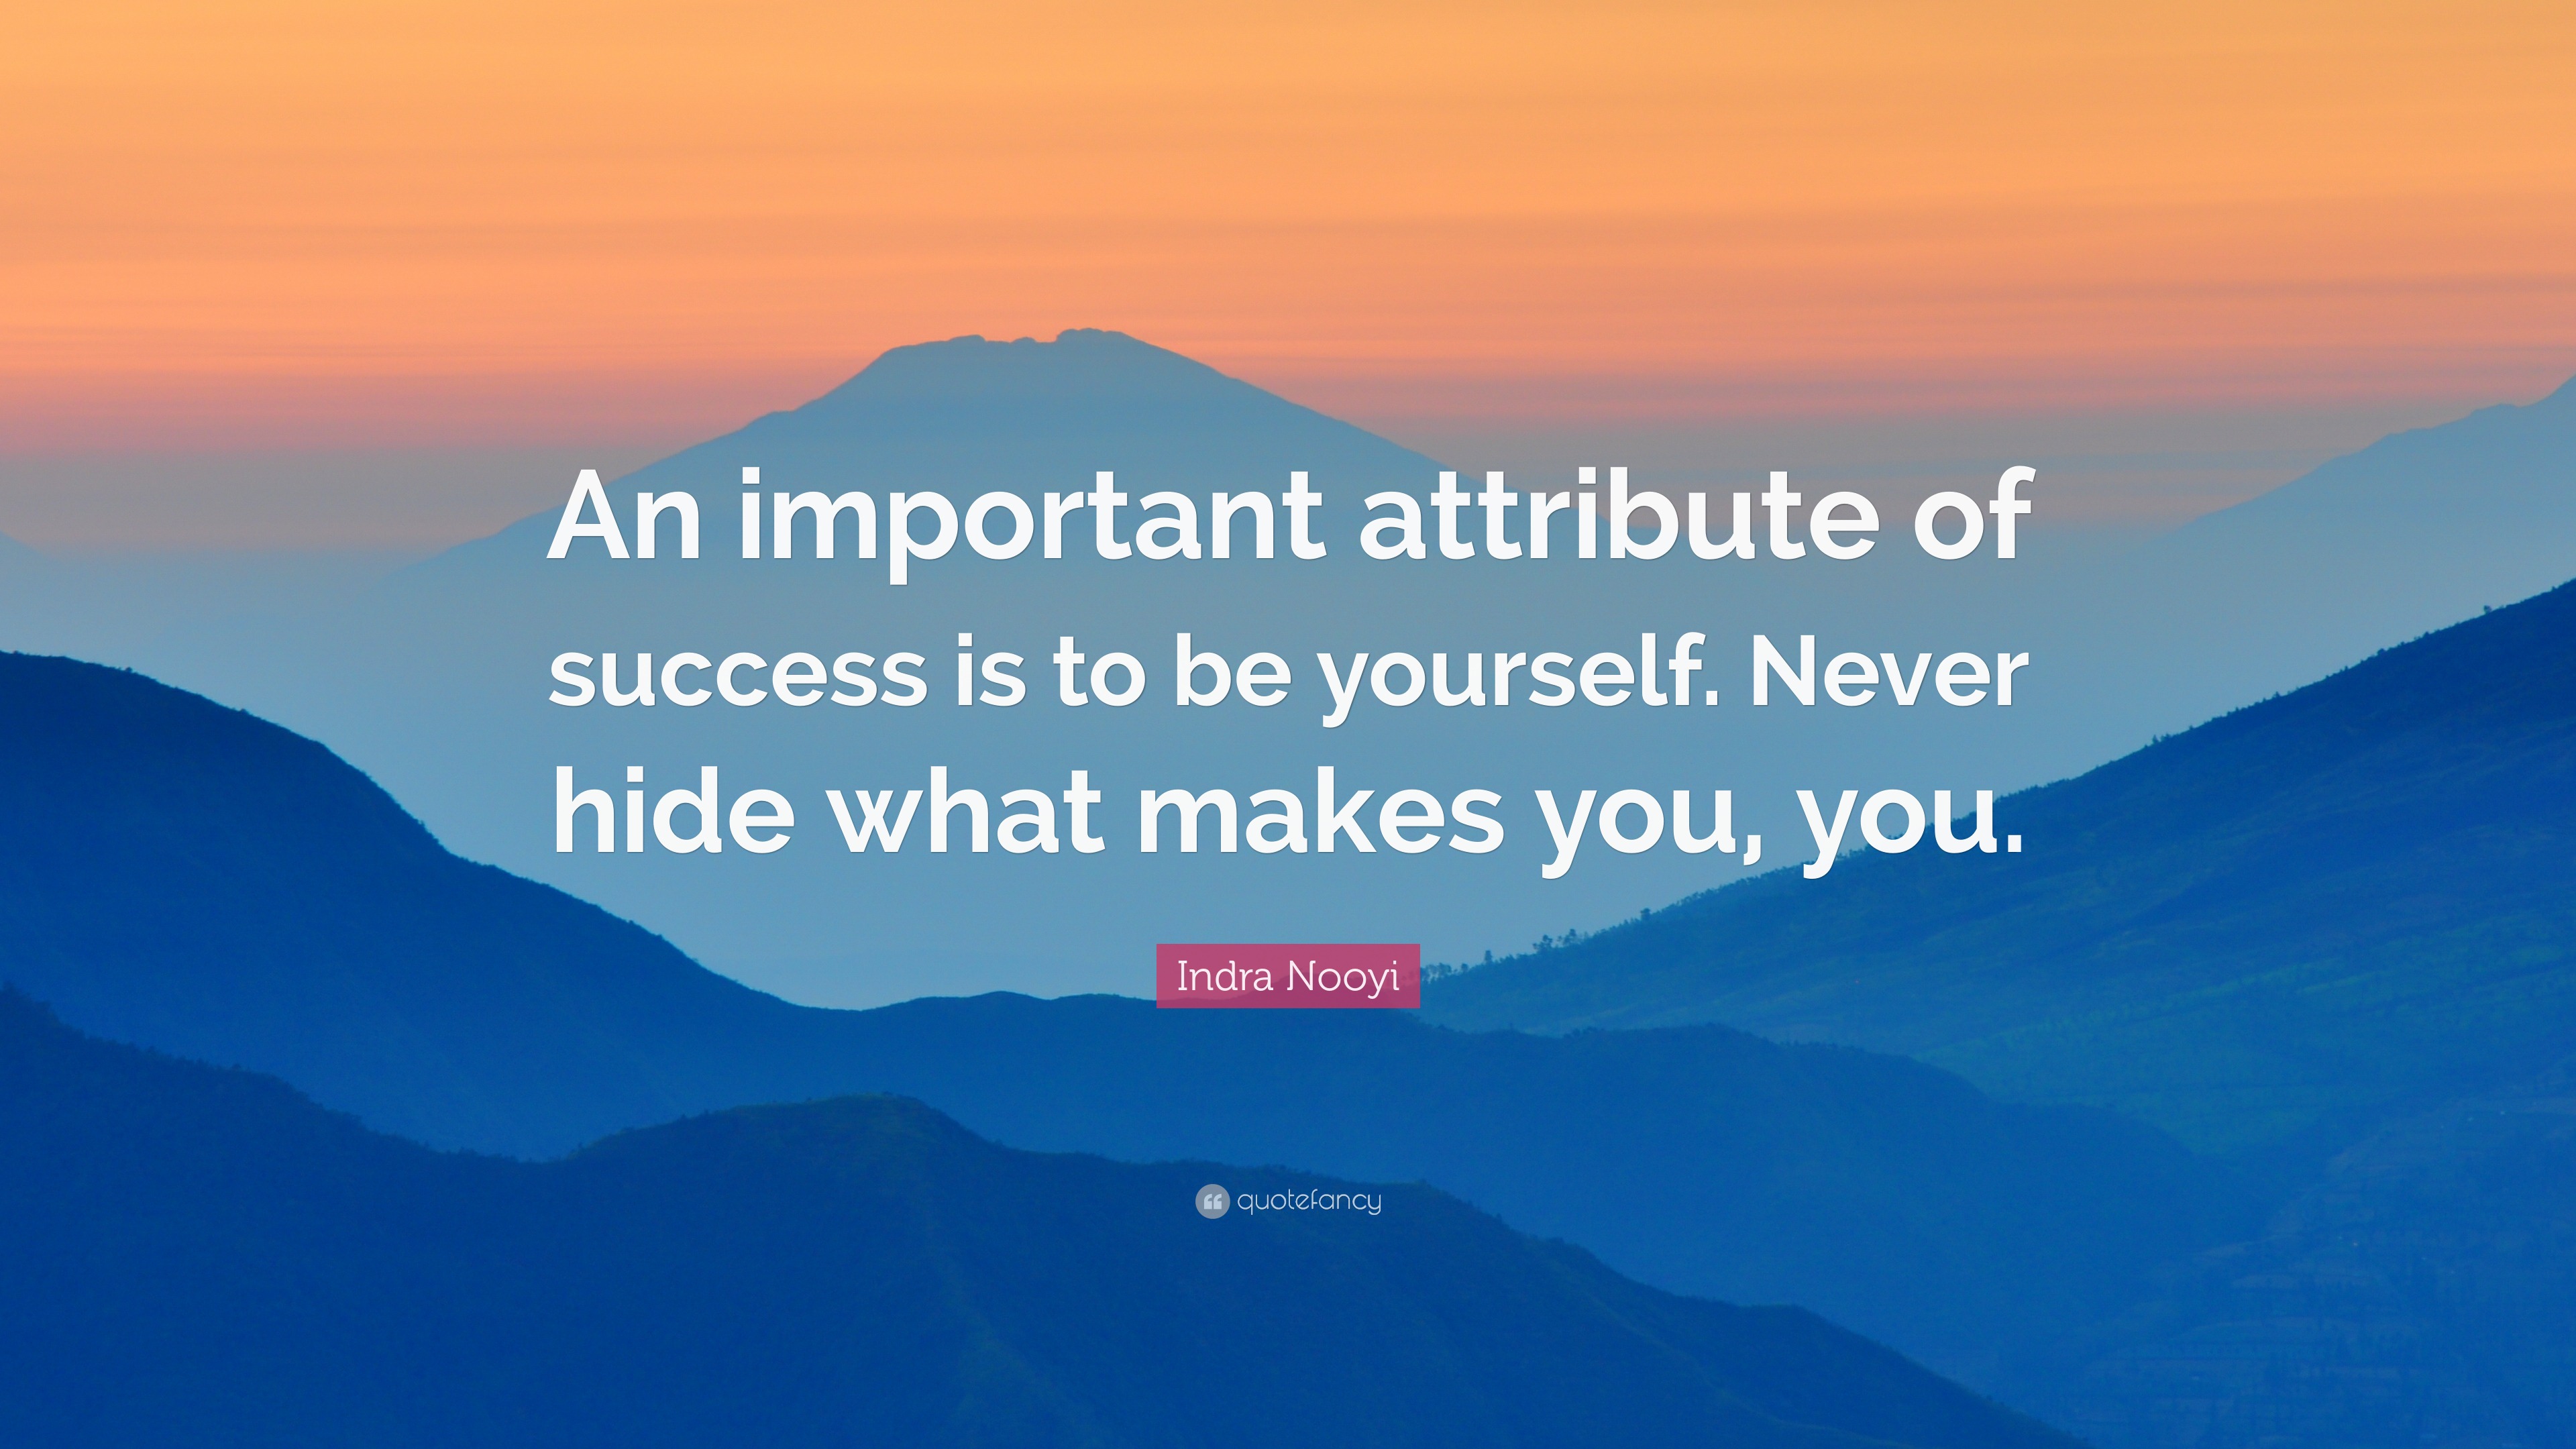 Indra Nooyi Quote: “An important attribute of success is to be yourself ...